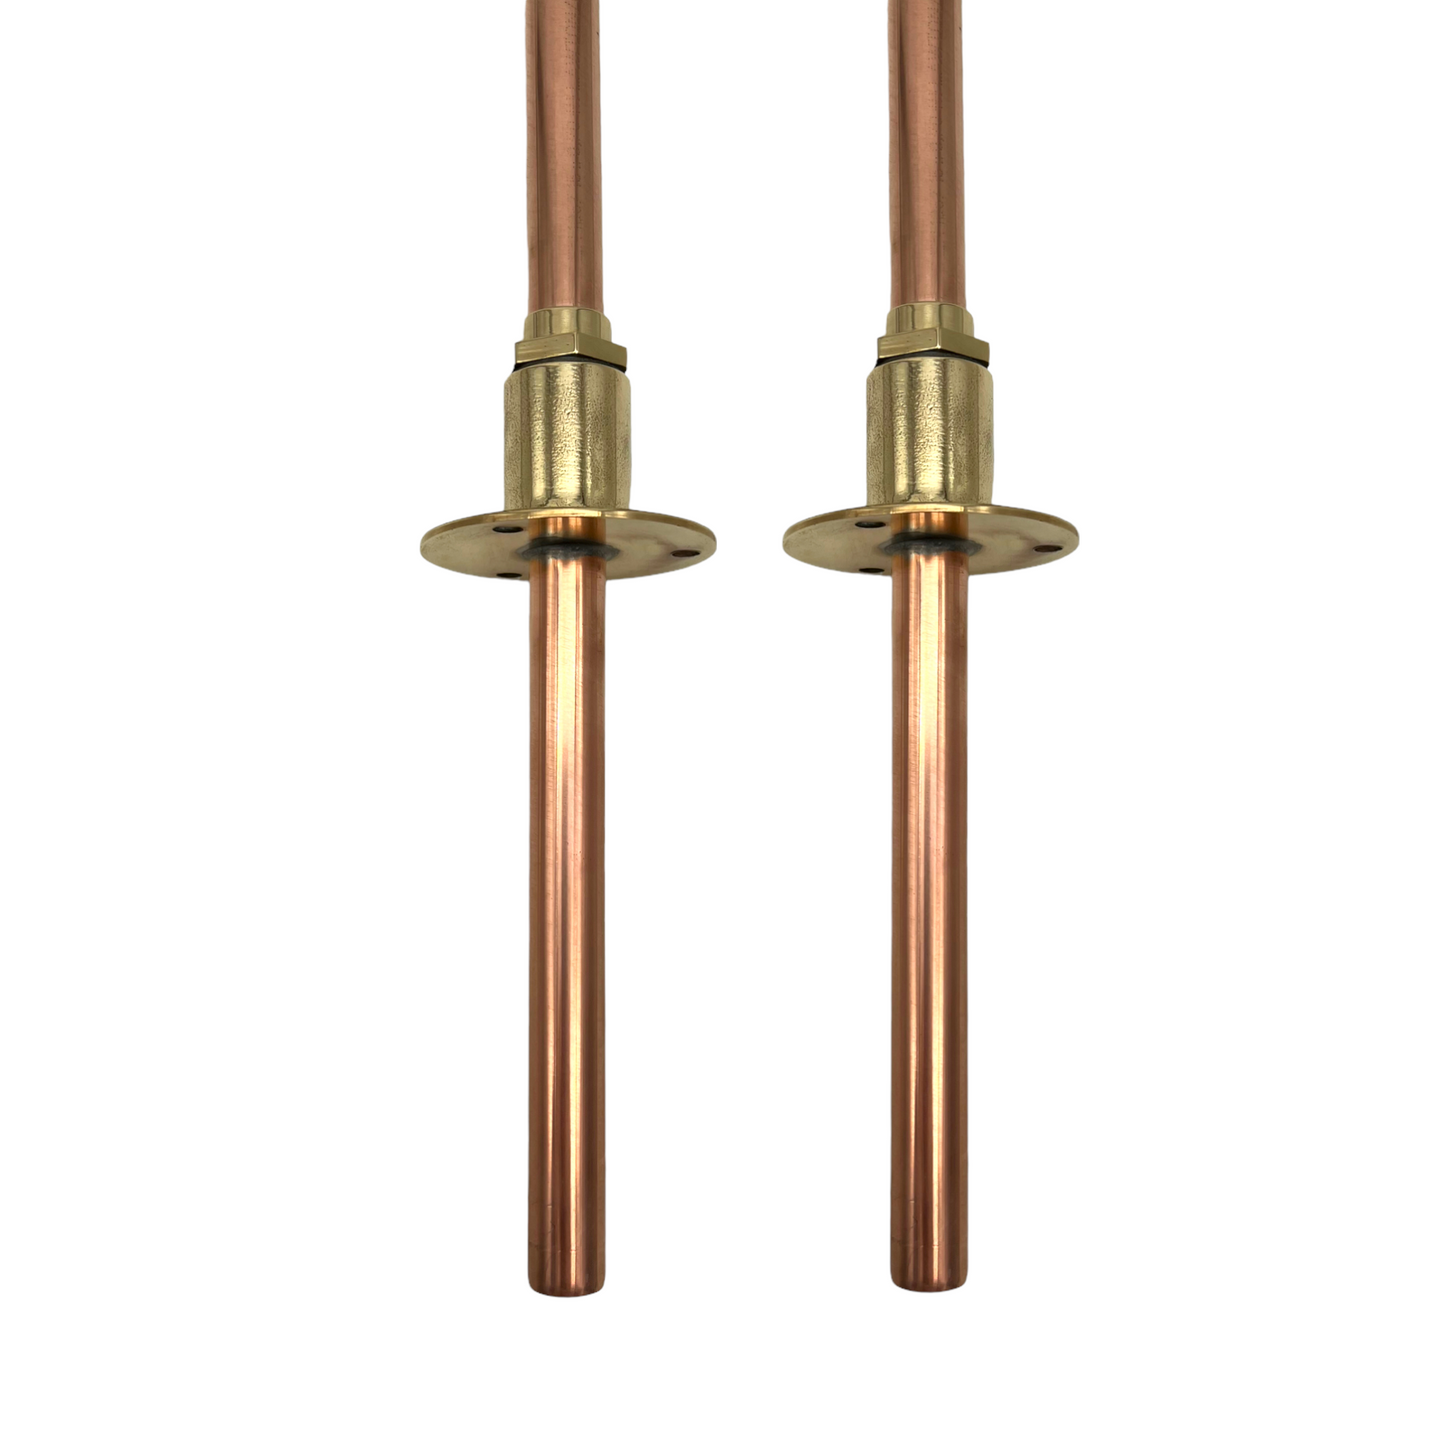 tail ends of Pair of copper and brass vintage style kitchen taps sold by All Things French Store